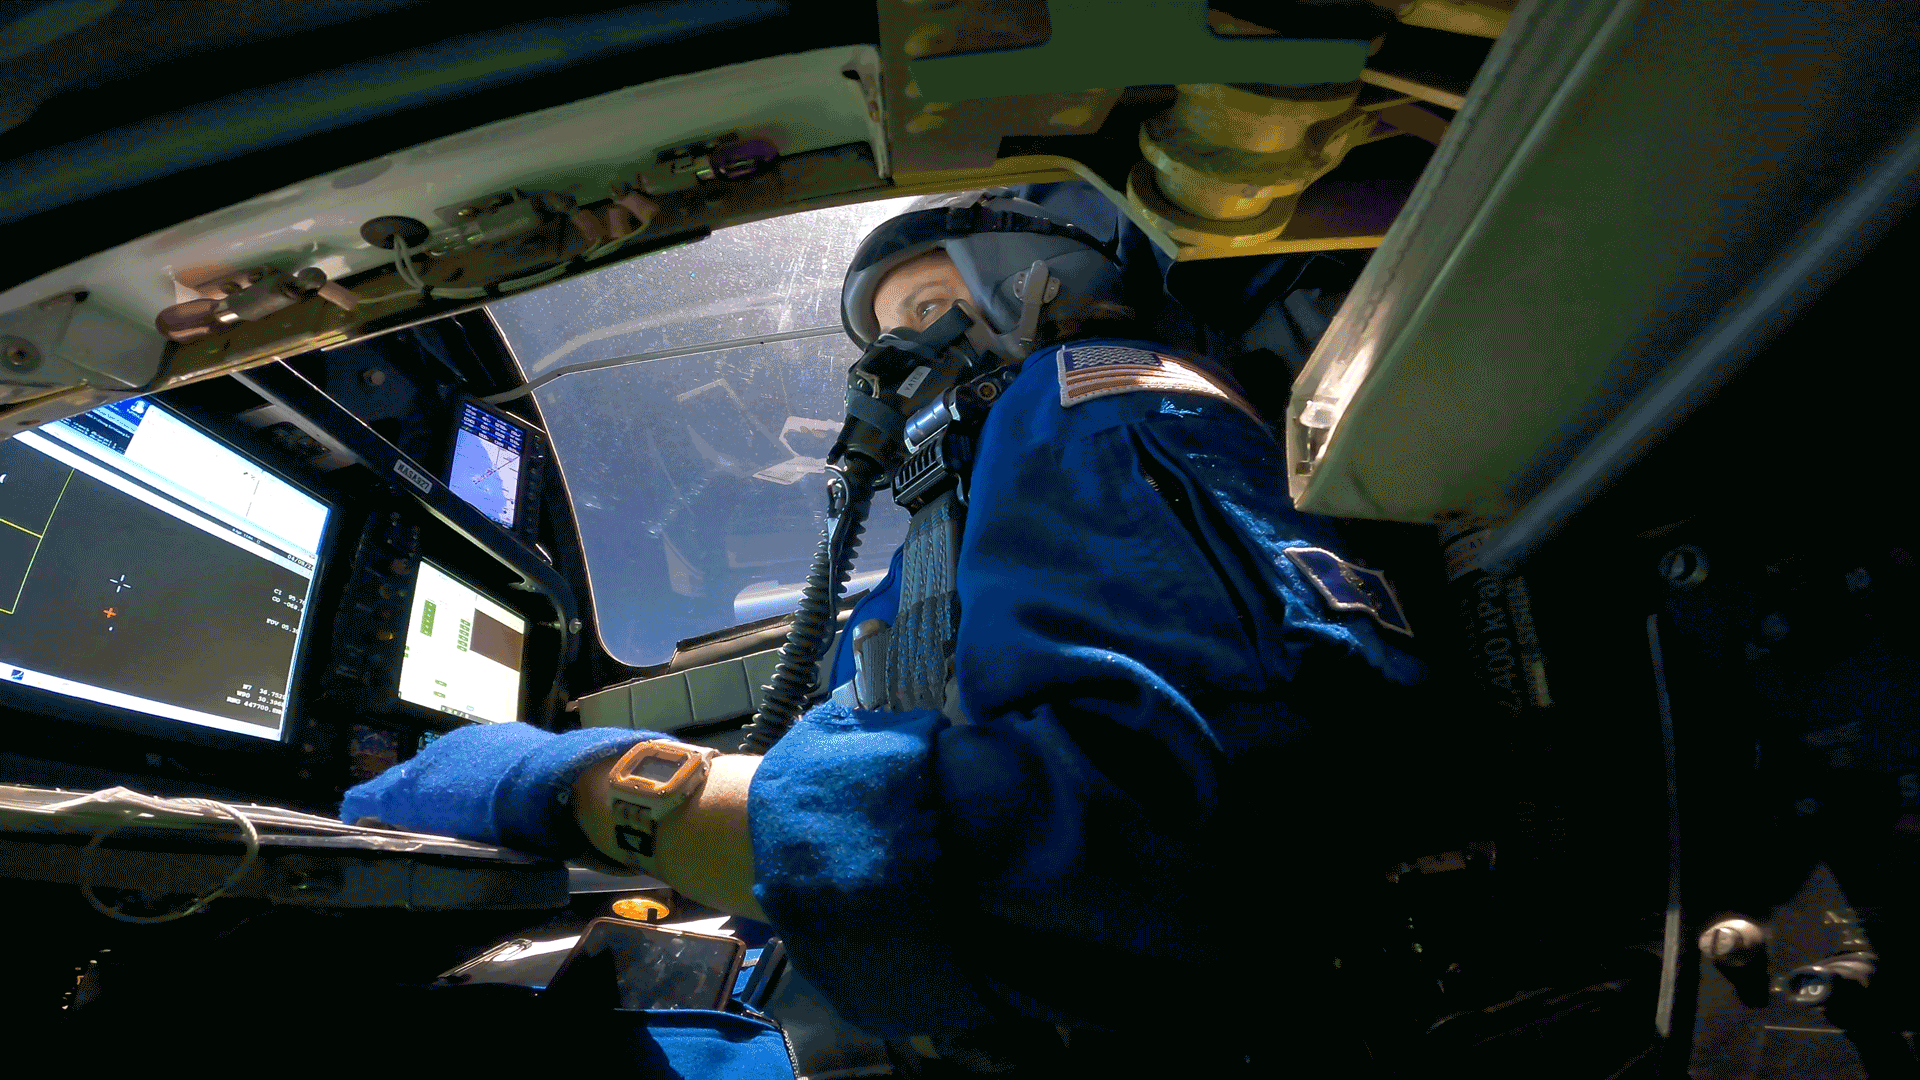 While flying, a view of the pilot in the cockpit from below her seat. The pilot is wearing a blue suit and a helmet with a tube attached to the front. In front of her are several screens, including one showing the total solar eclipse. The cockpit gets darker and darker as she flies in the eclipse's shadow.